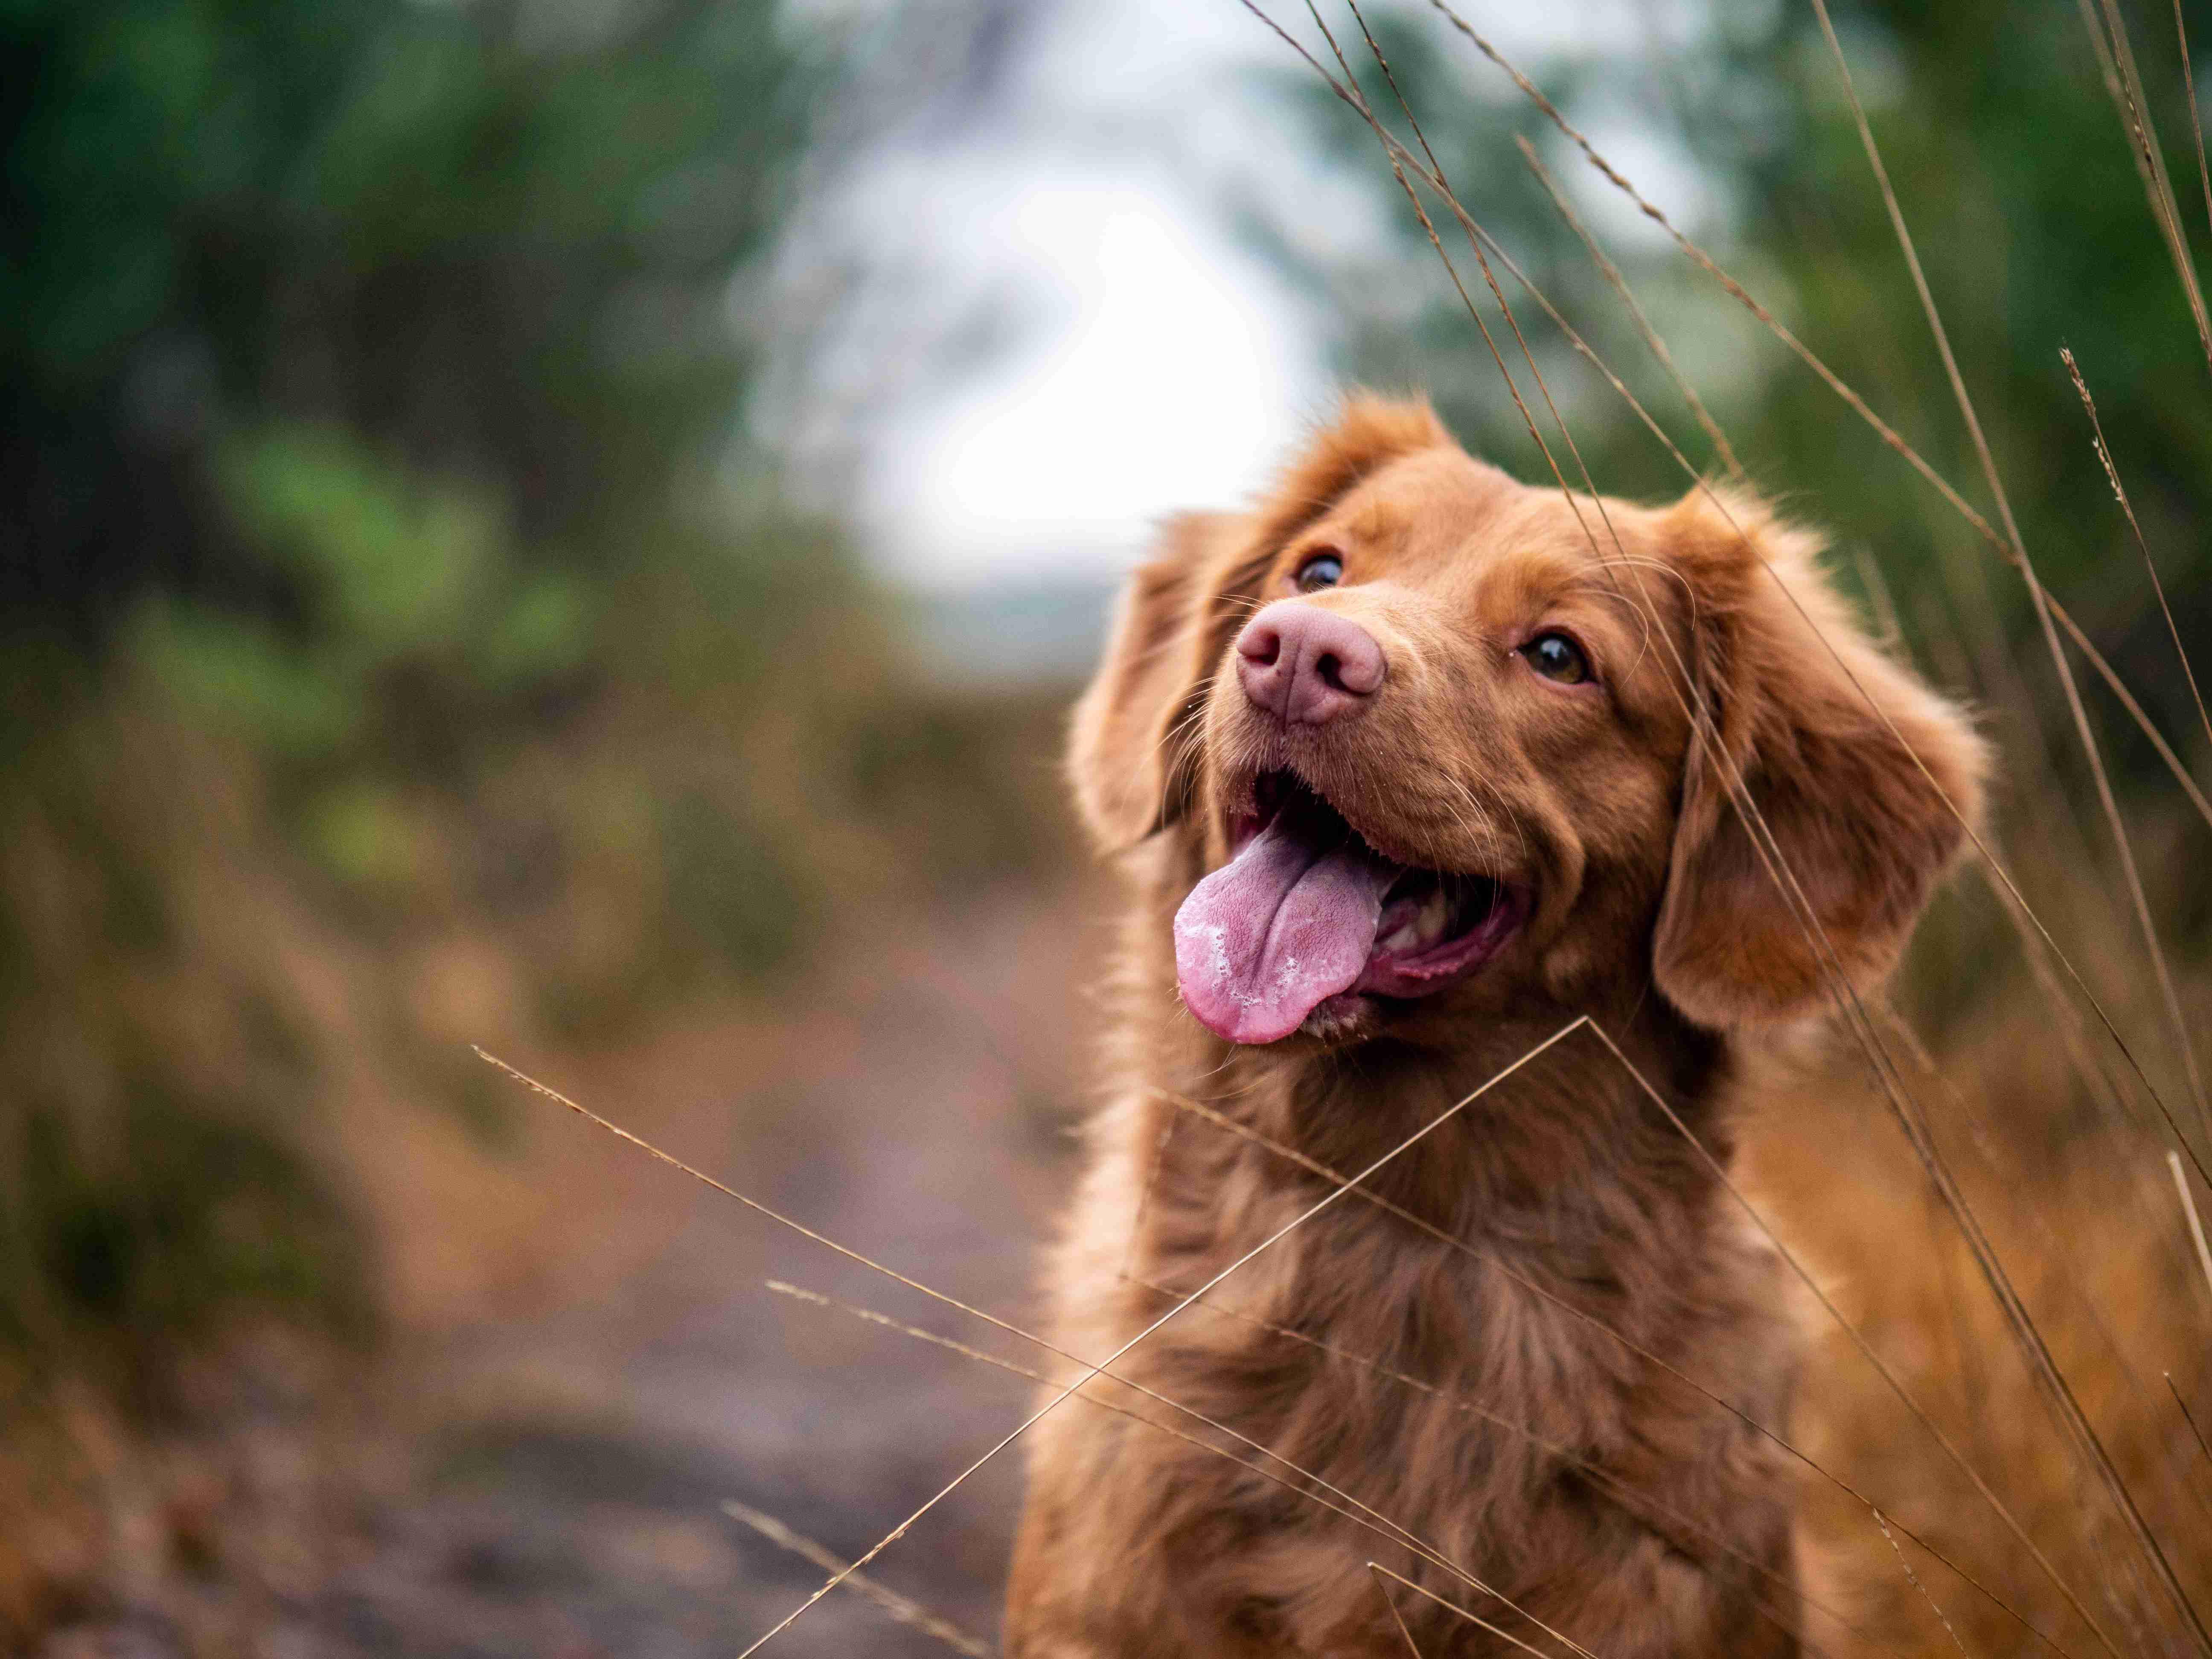 How can I prevent my golden retriever from developing separation anxiety?